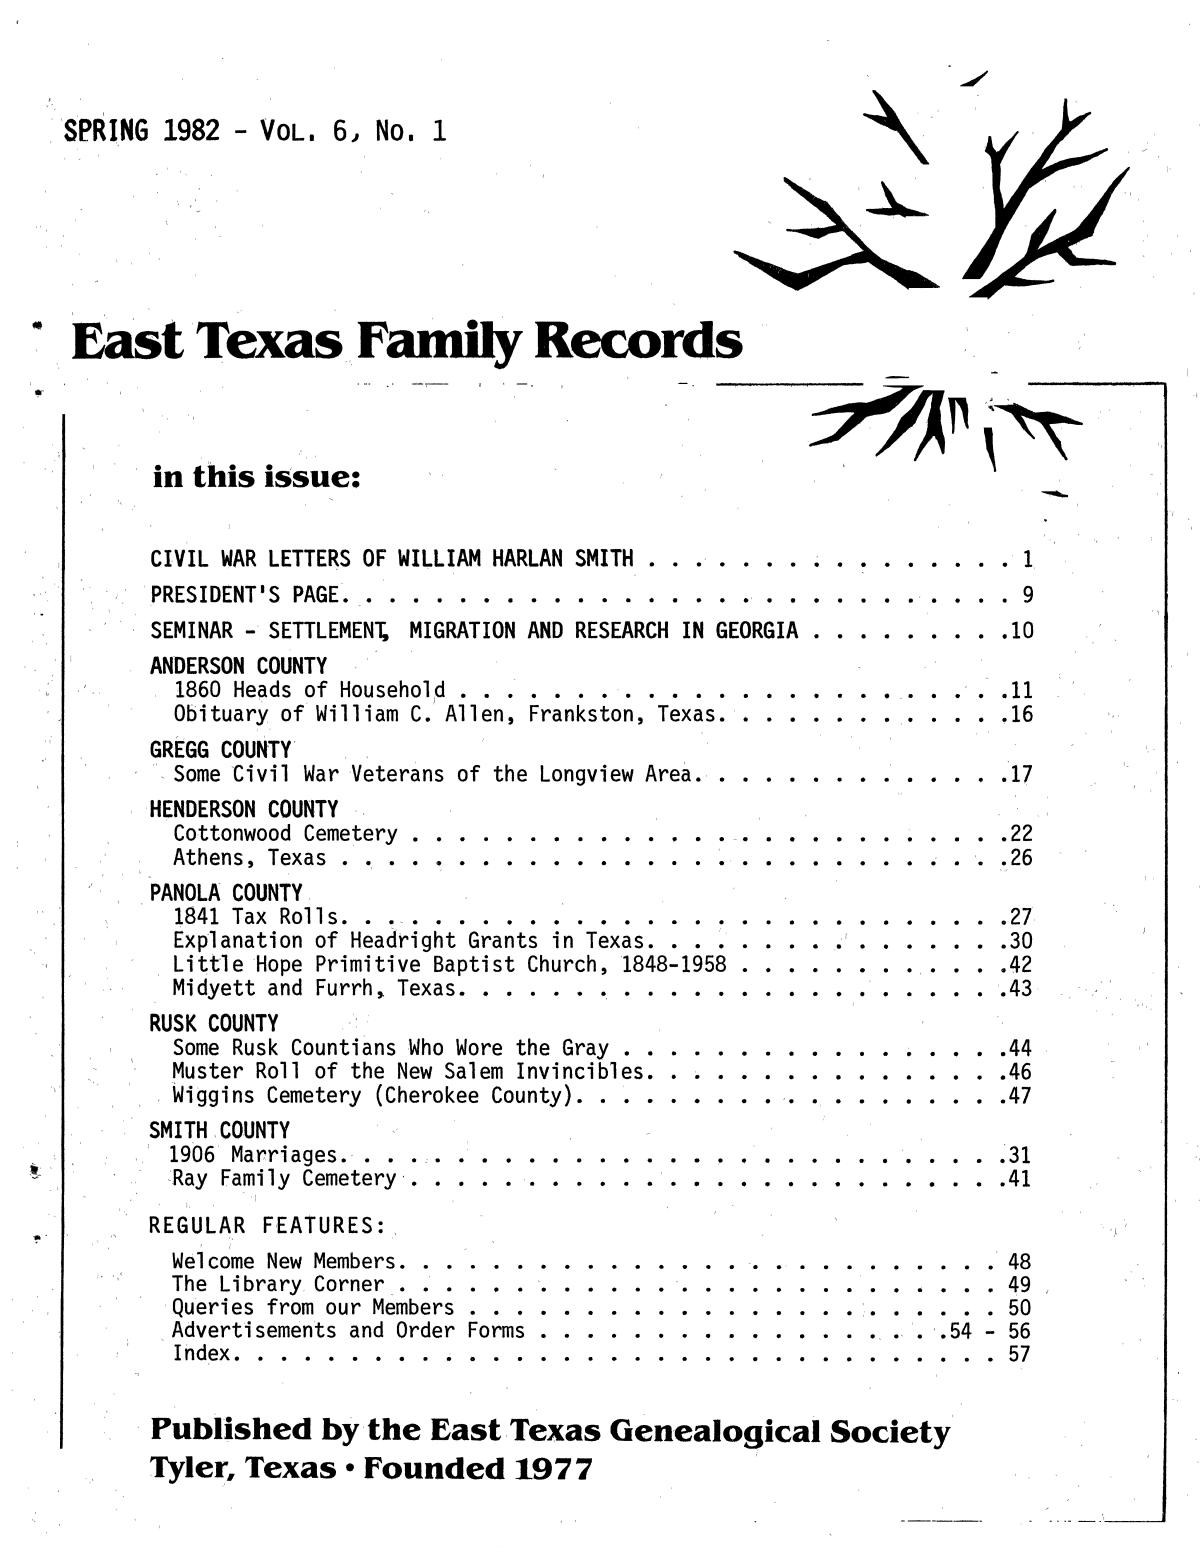 East Texas Family Records, Volume 6, Number 1, Spring 1982
                                                
                                                    Front Cover
                                                